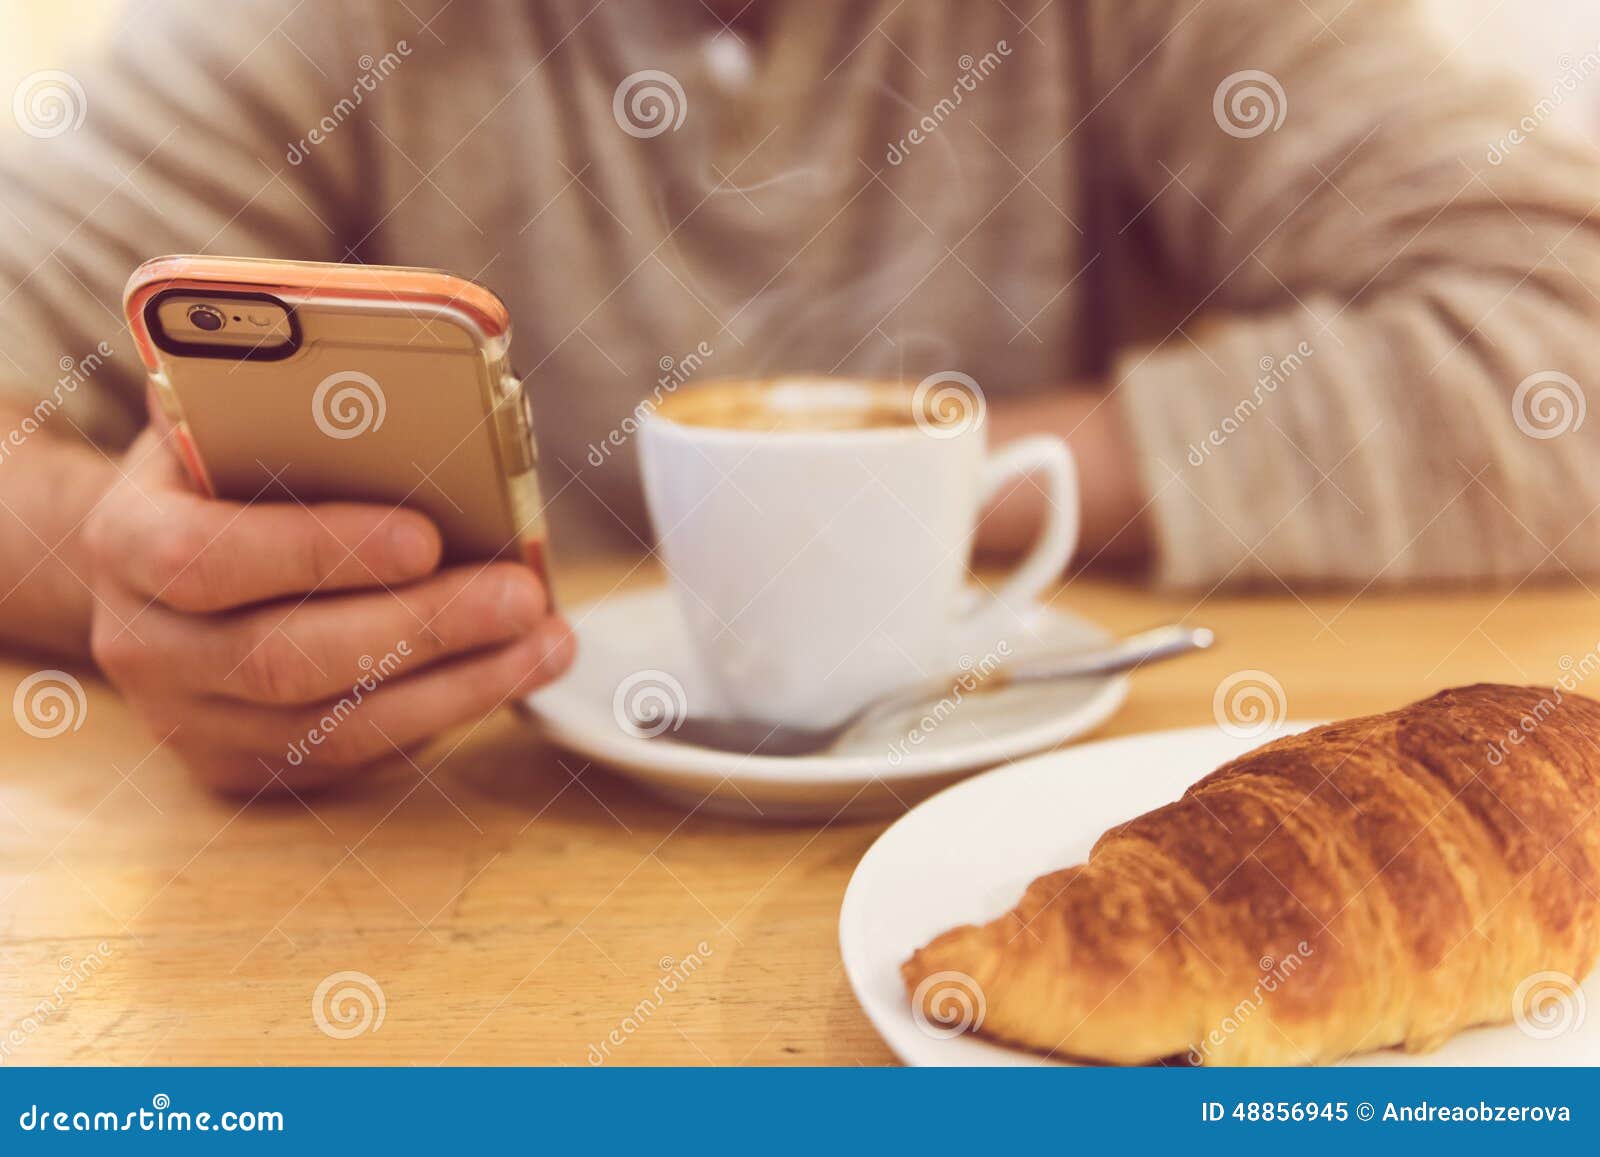 detail image of unrecognisable man drinking coffee and holding smart phone while having breakfast in restaurant.